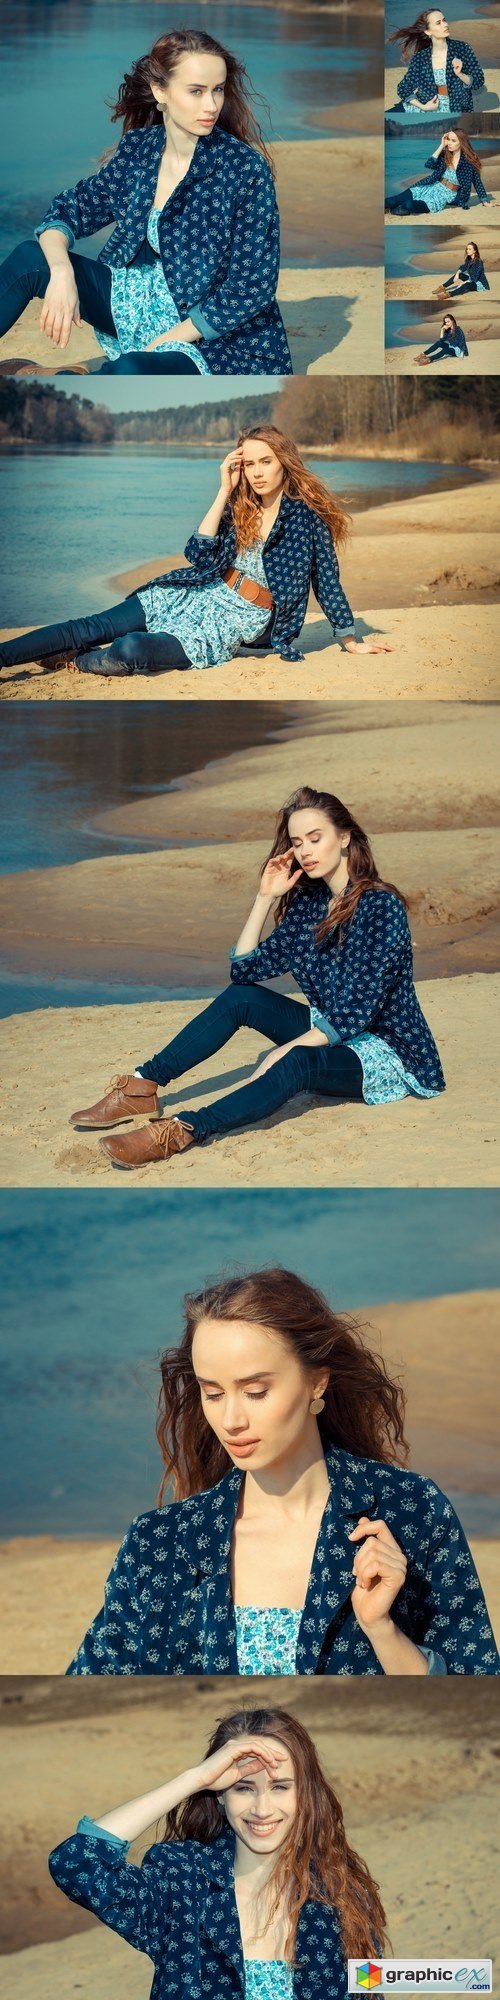 Dreamy lonely hipster girl on the sand